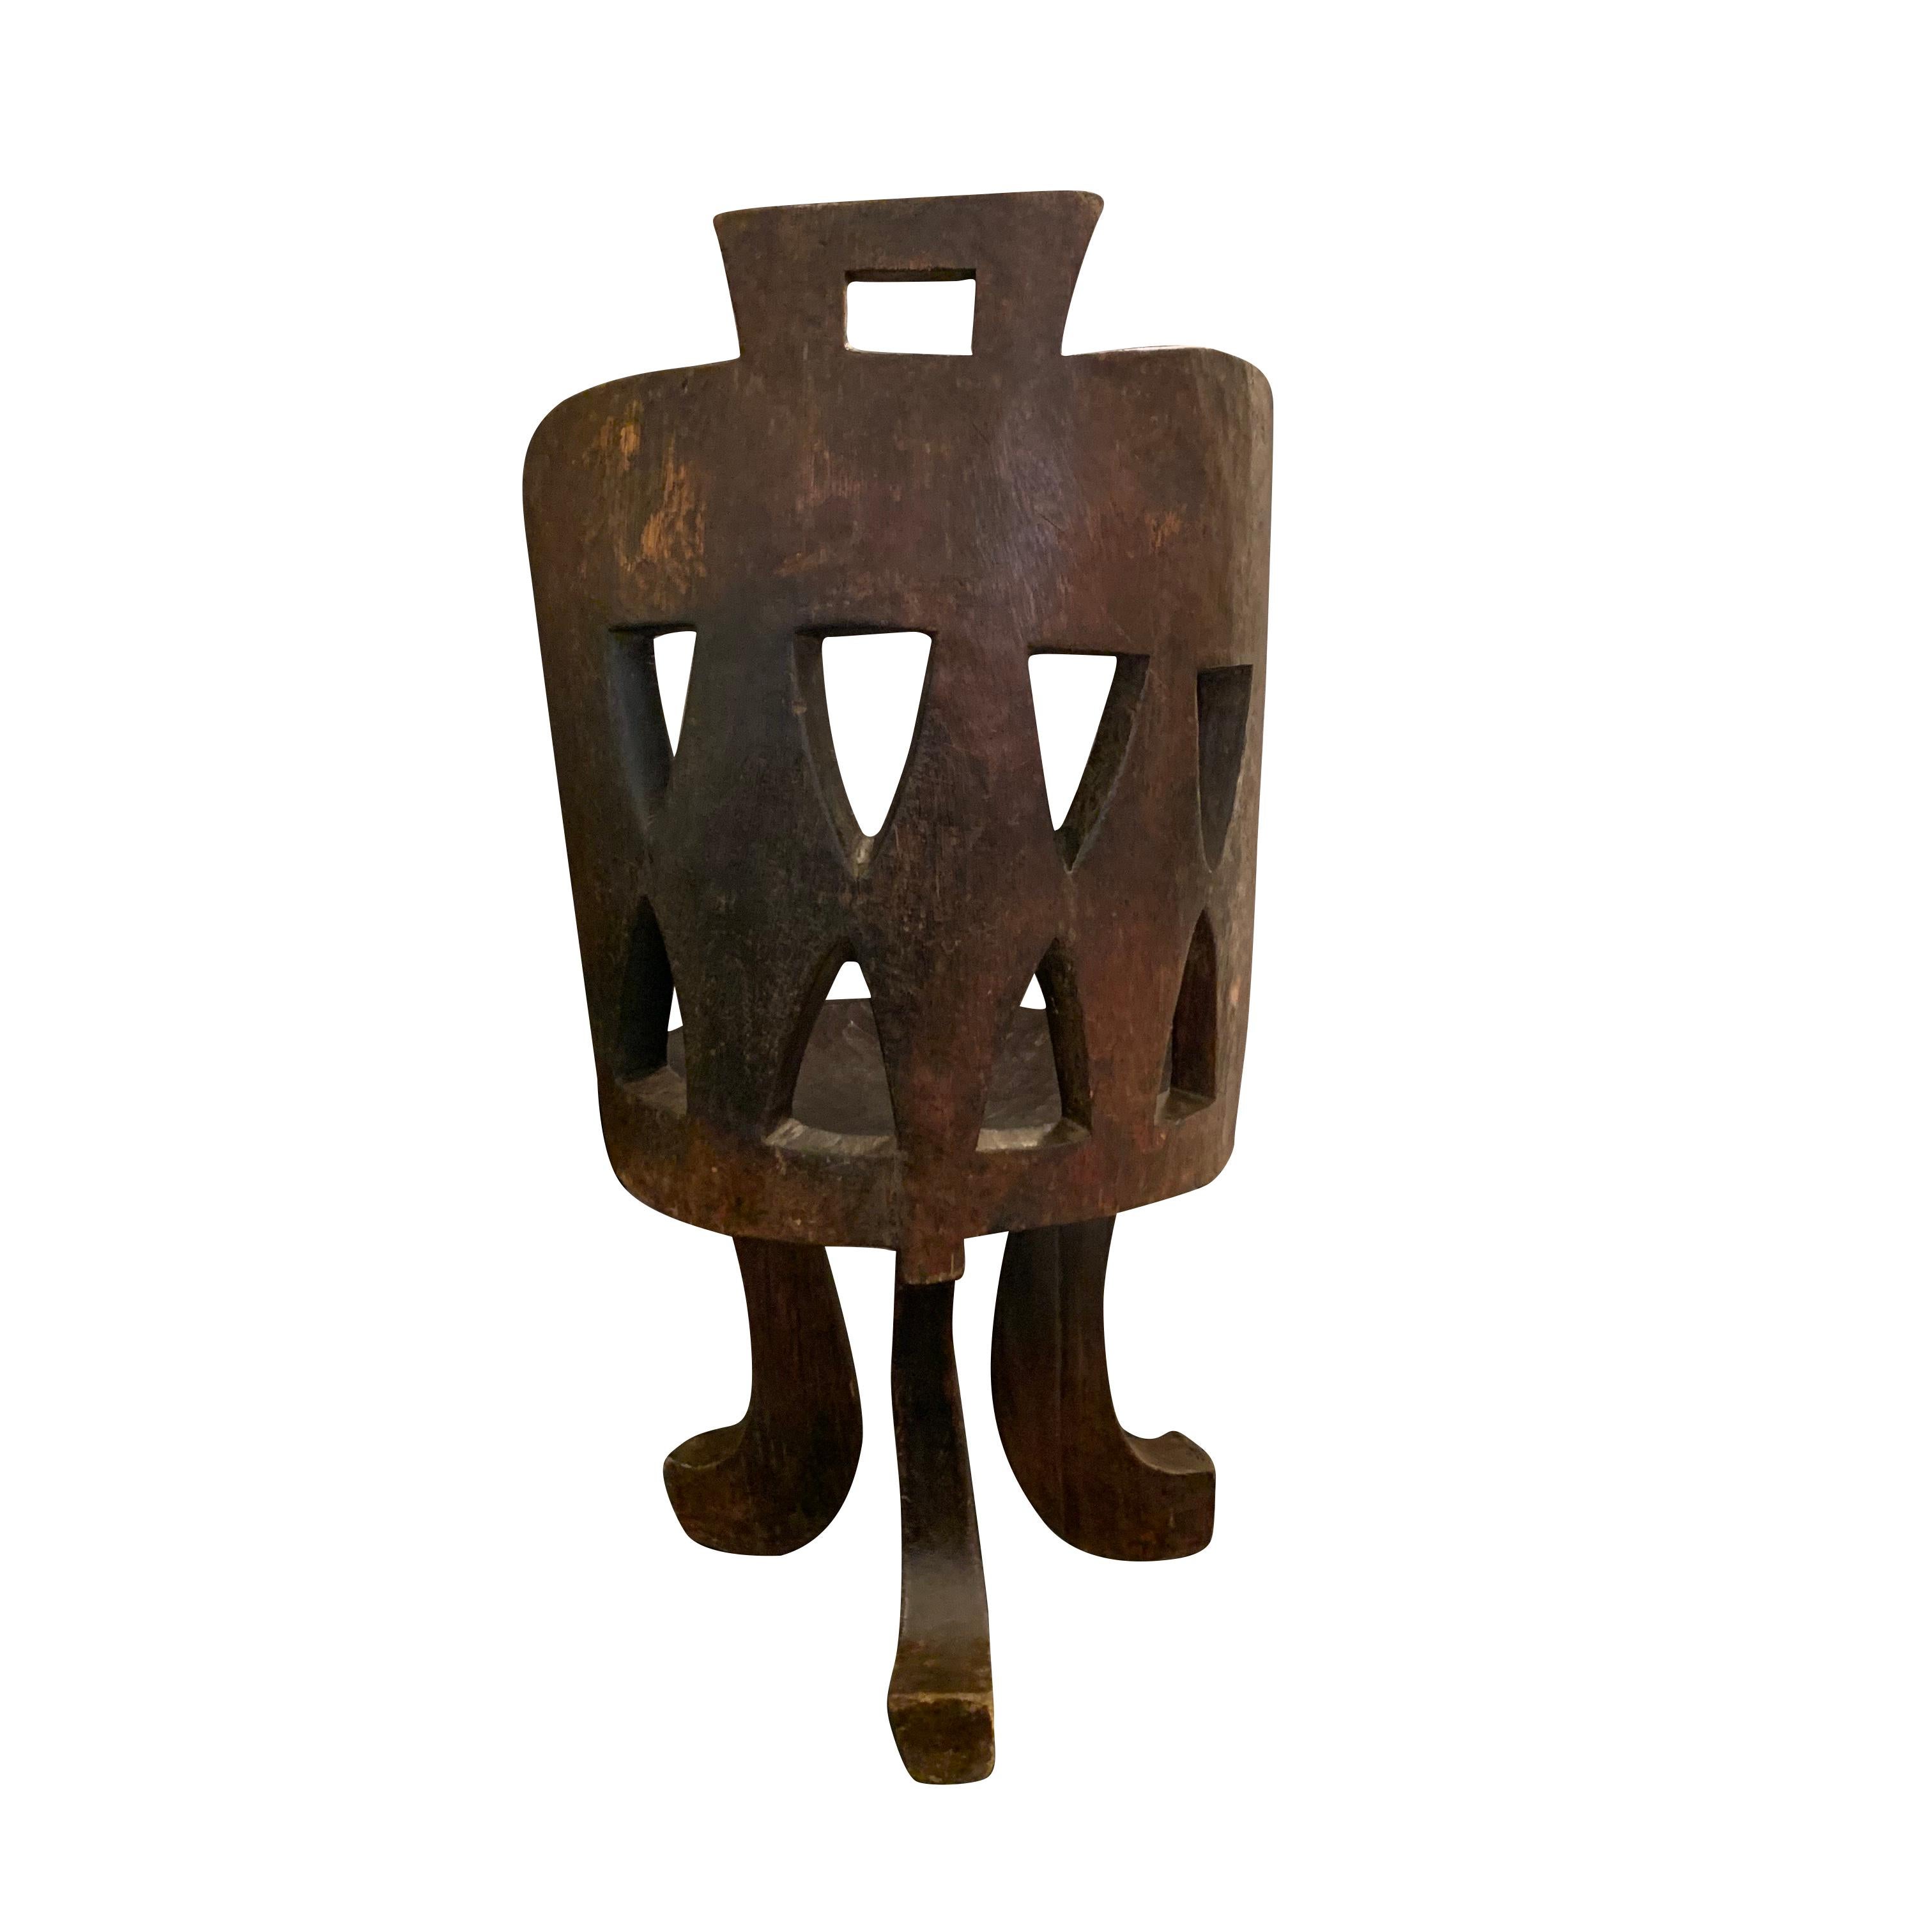 Ethiopian dark brown hand carved wood side chair.
This chair is carved in the traditional Ethiopian style. 
Diamond shapes are carved out of the back of the barrel back shape which sits on three curved legs.
This is a very attractive and unique